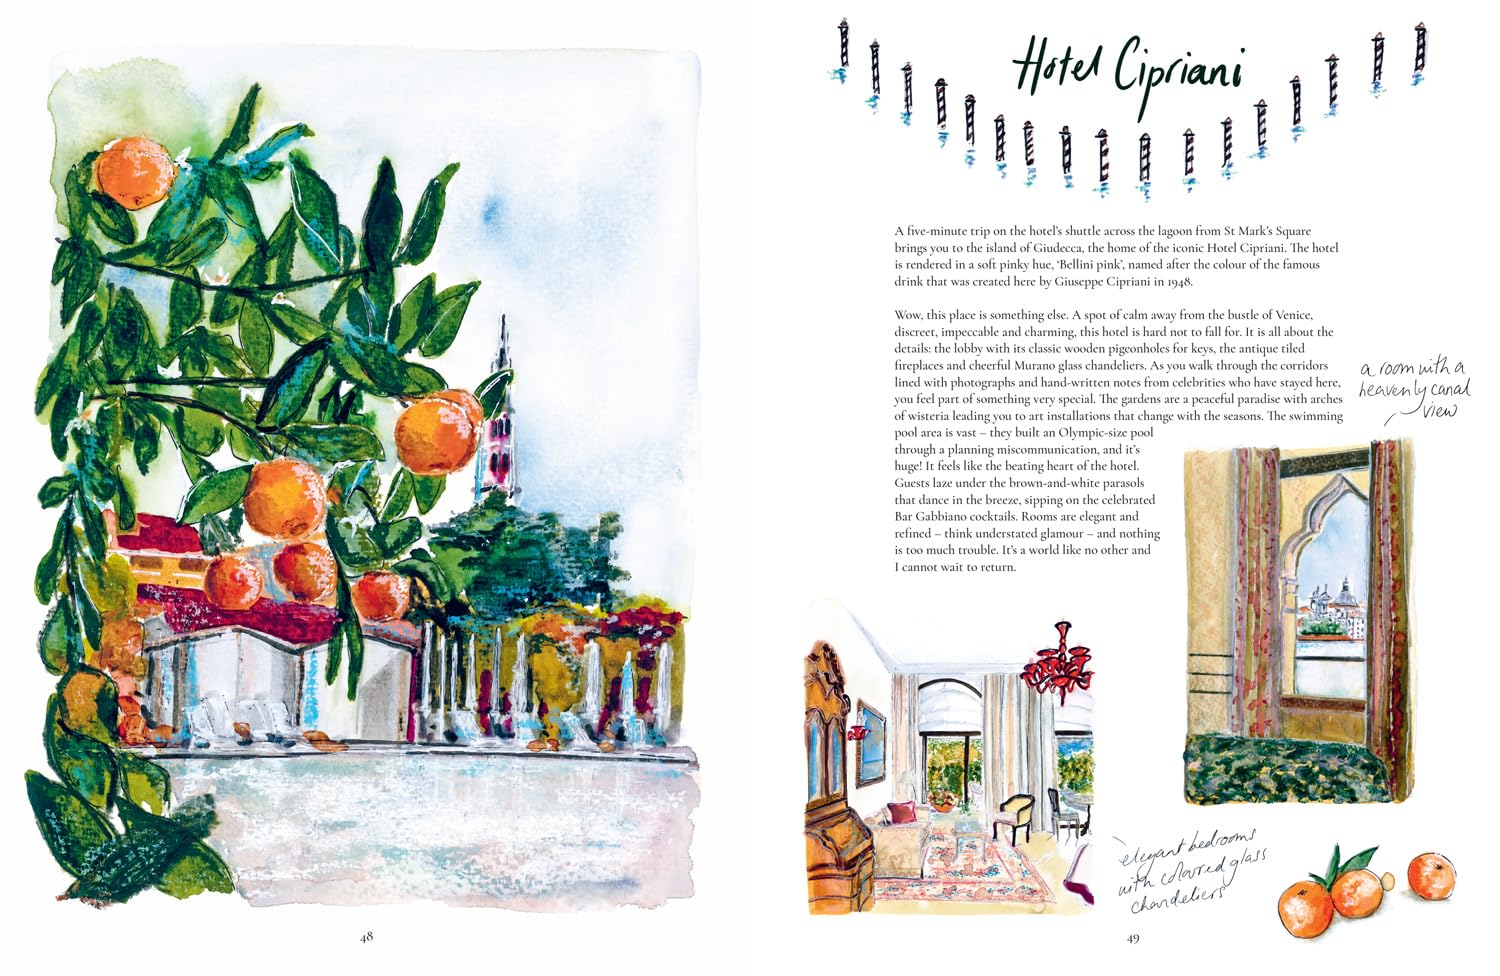 Painted Travels: The perfect gift for travel lovers to explore iconic, luxurious and charming places.